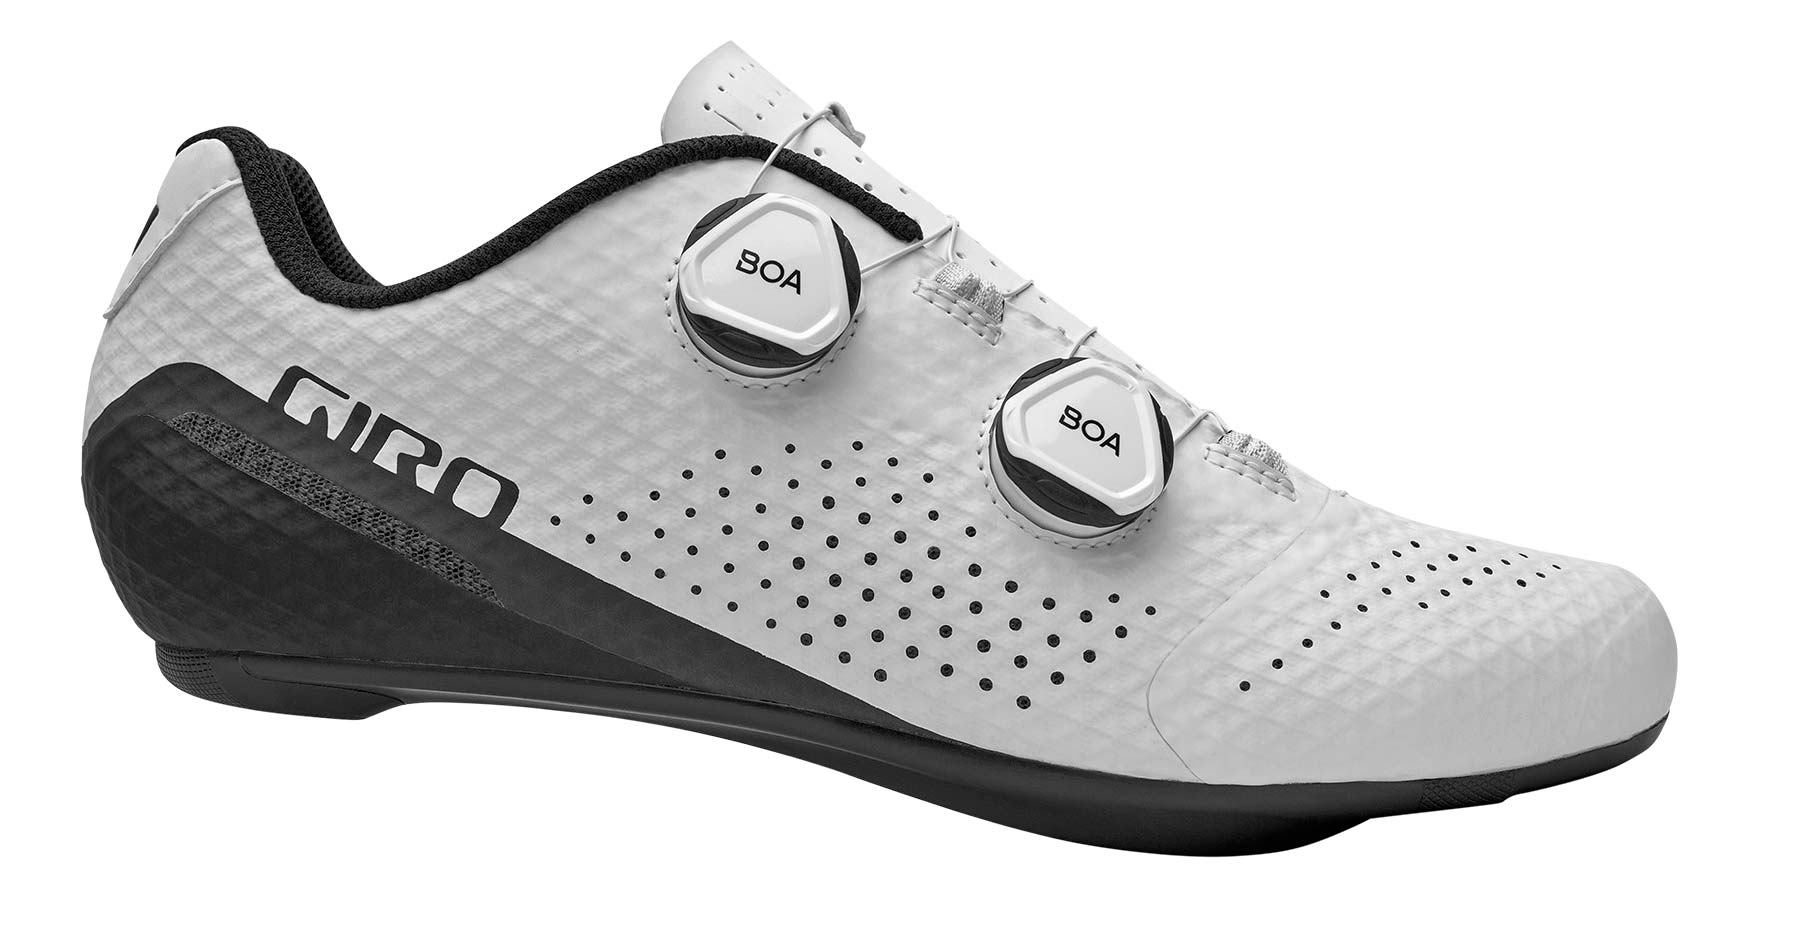 Giro Regime high performance road shoes at a mid-level price, white side